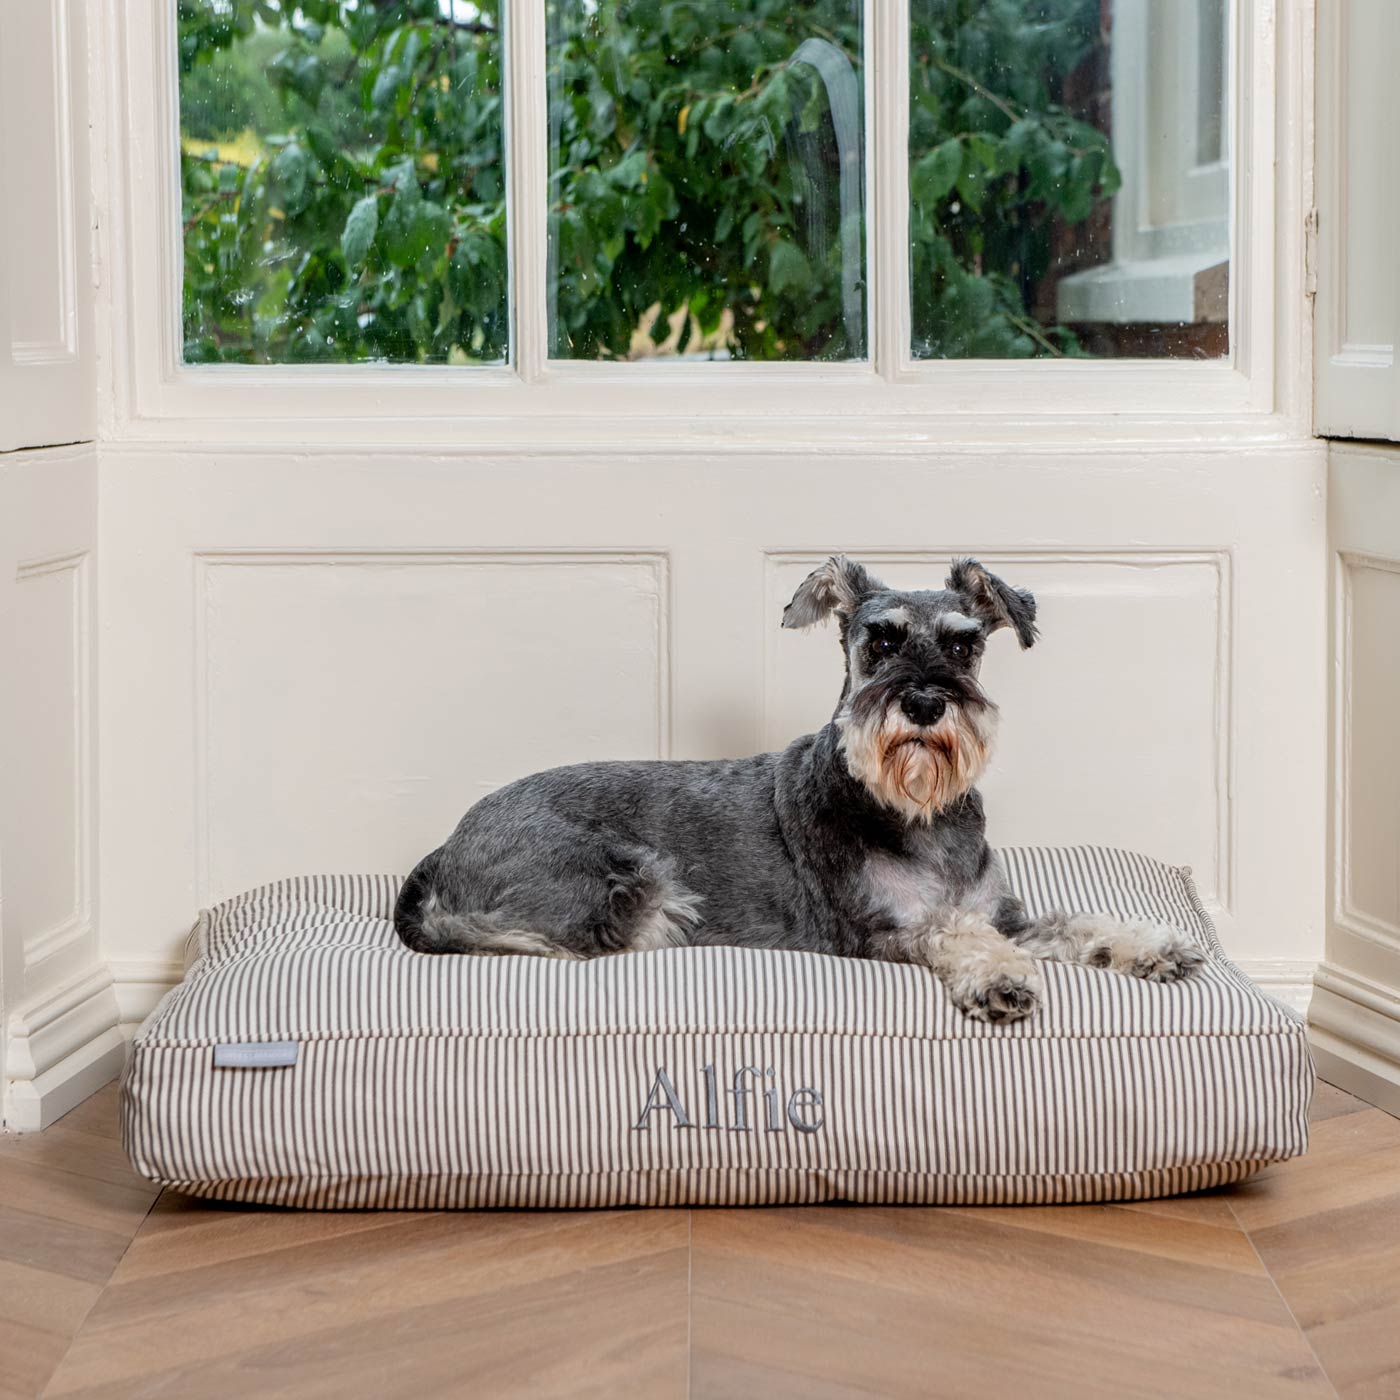 Luxury Dog Cushion, in Regency Stripe. The Perfect Dog Cage For The Ultimate Naptime, Available Now at Lords & Labradors US